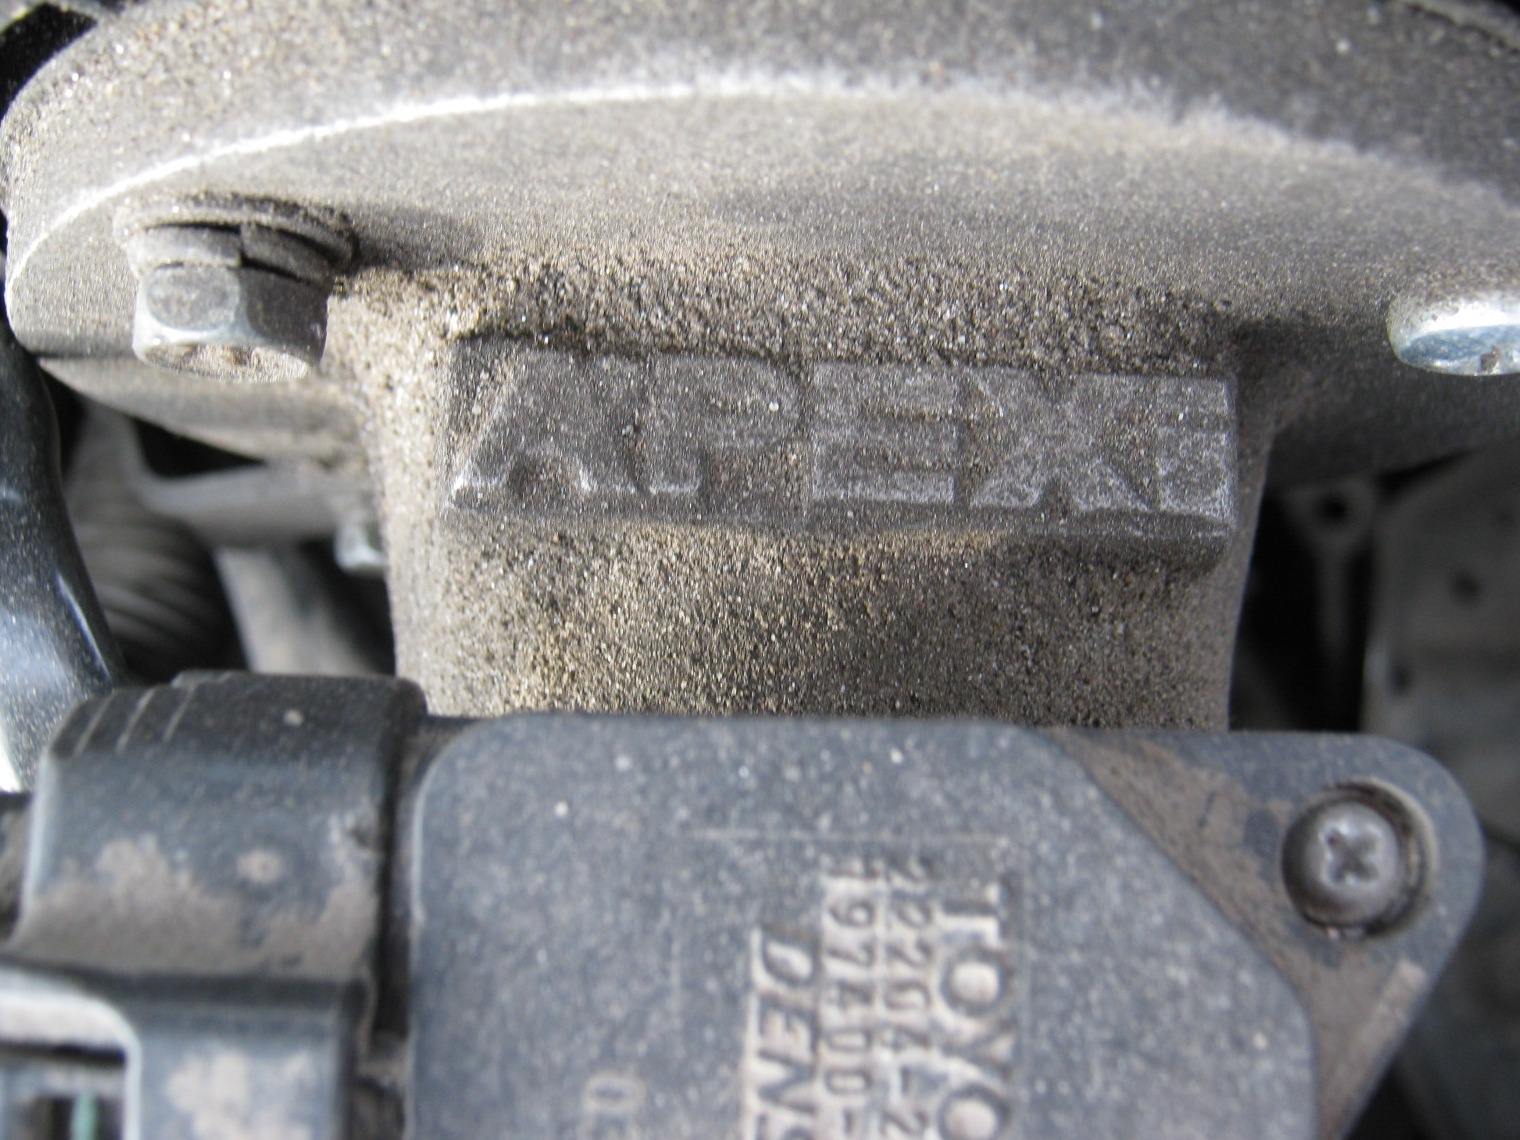 Breathing with Apexi  - Toyota bB 15 liter 2003